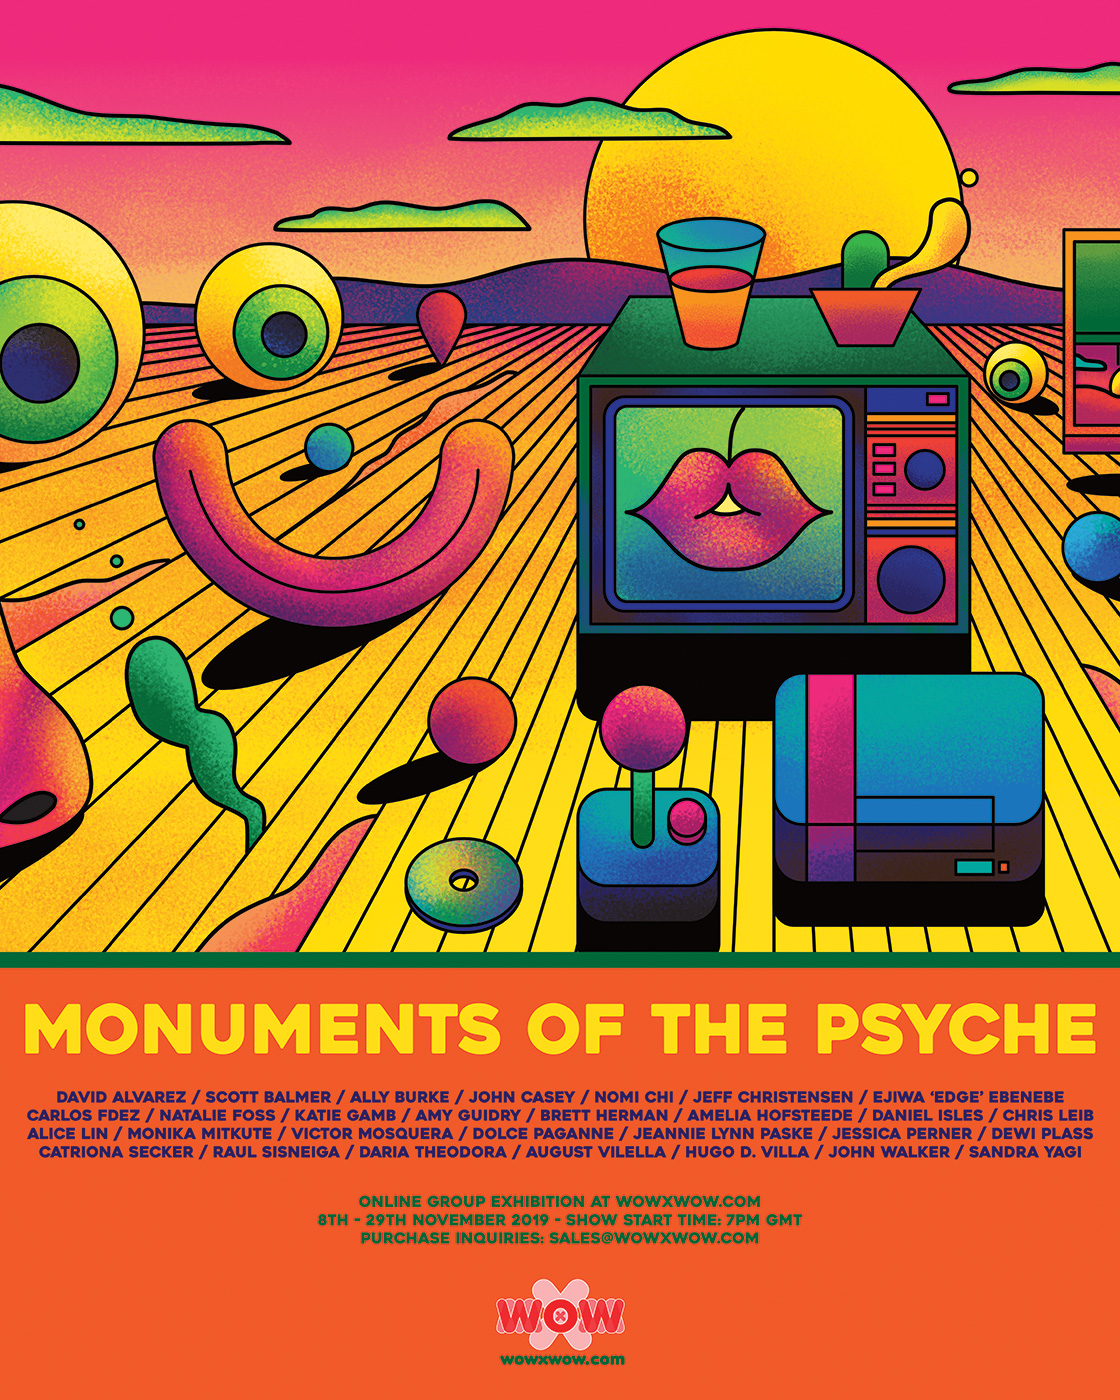 Monuments of the Psyche goes live tomorrow